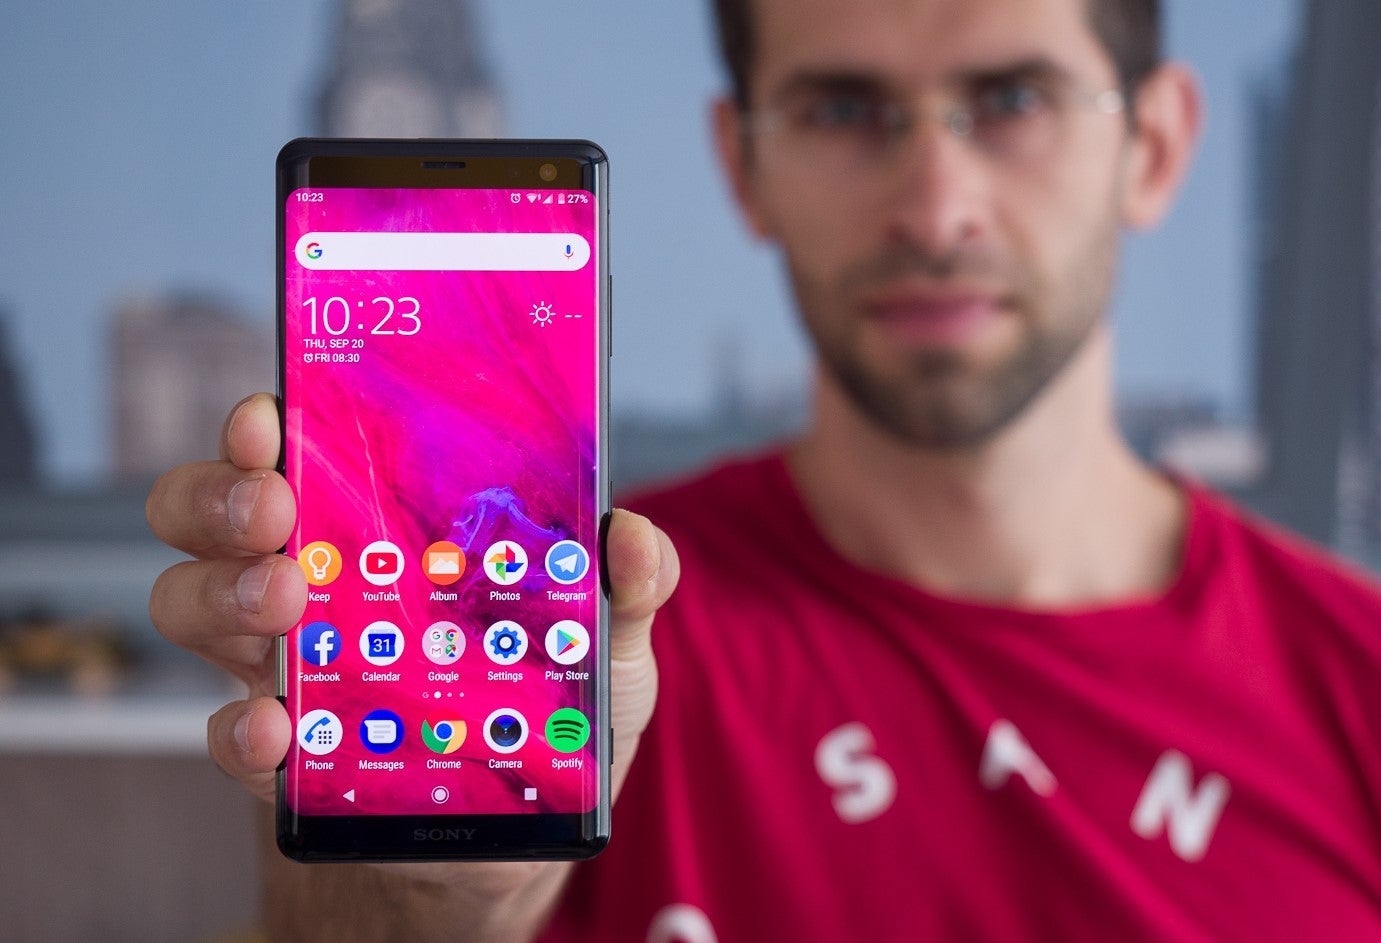 The Xperia XZ3 finally brought a modern look to Sony flagships - Why did Sony's smartphones lose their popularity?